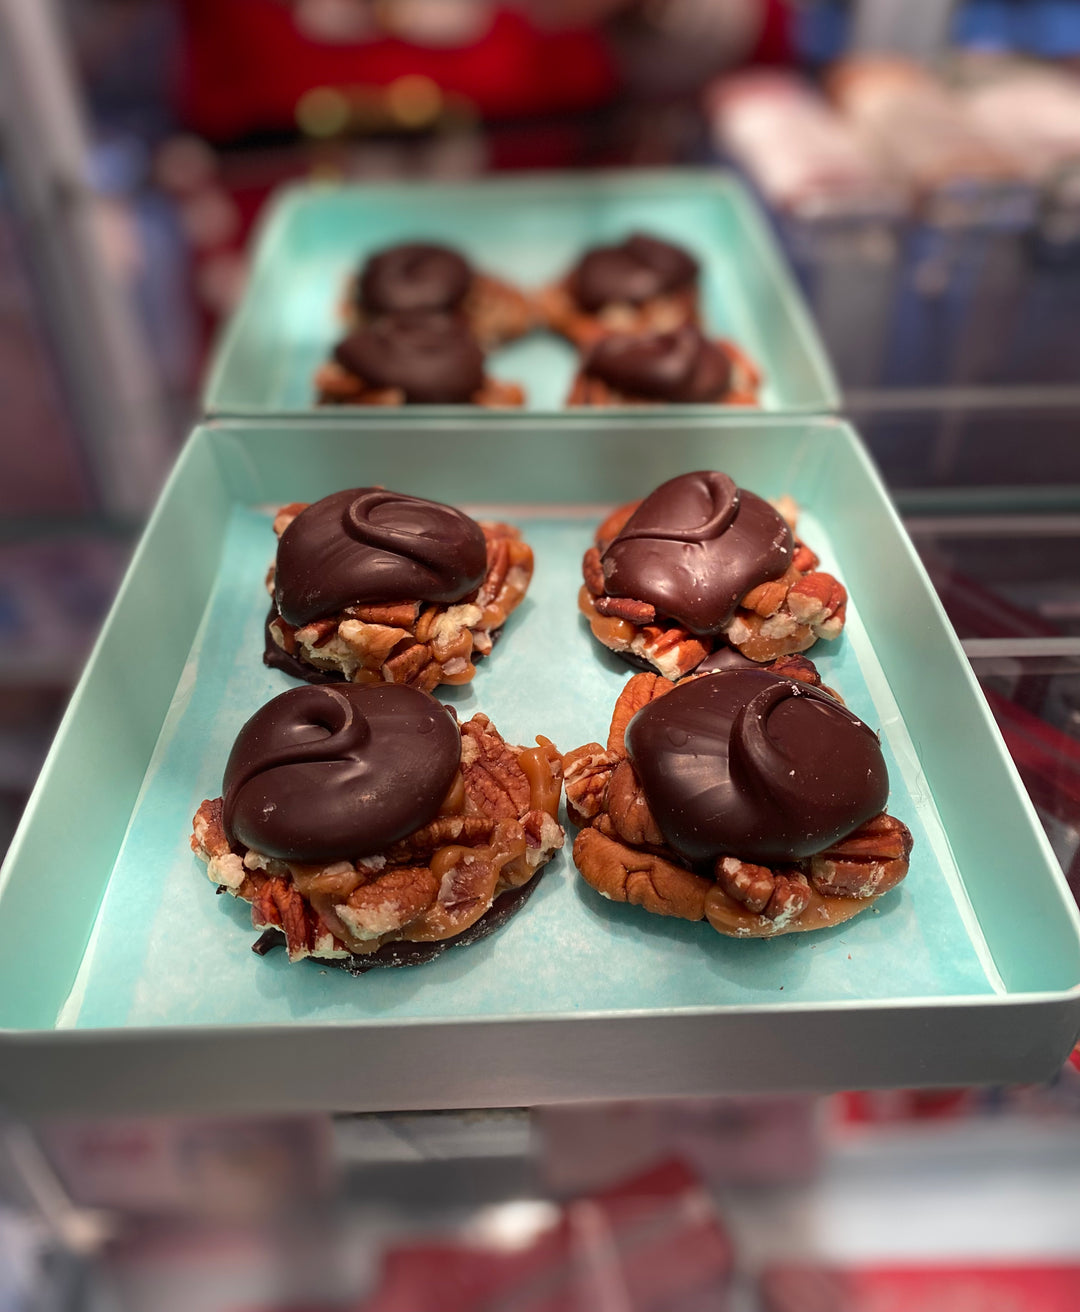 Dark Chocolate Pecan Turtles made by Nantasket Sweets in a gift box